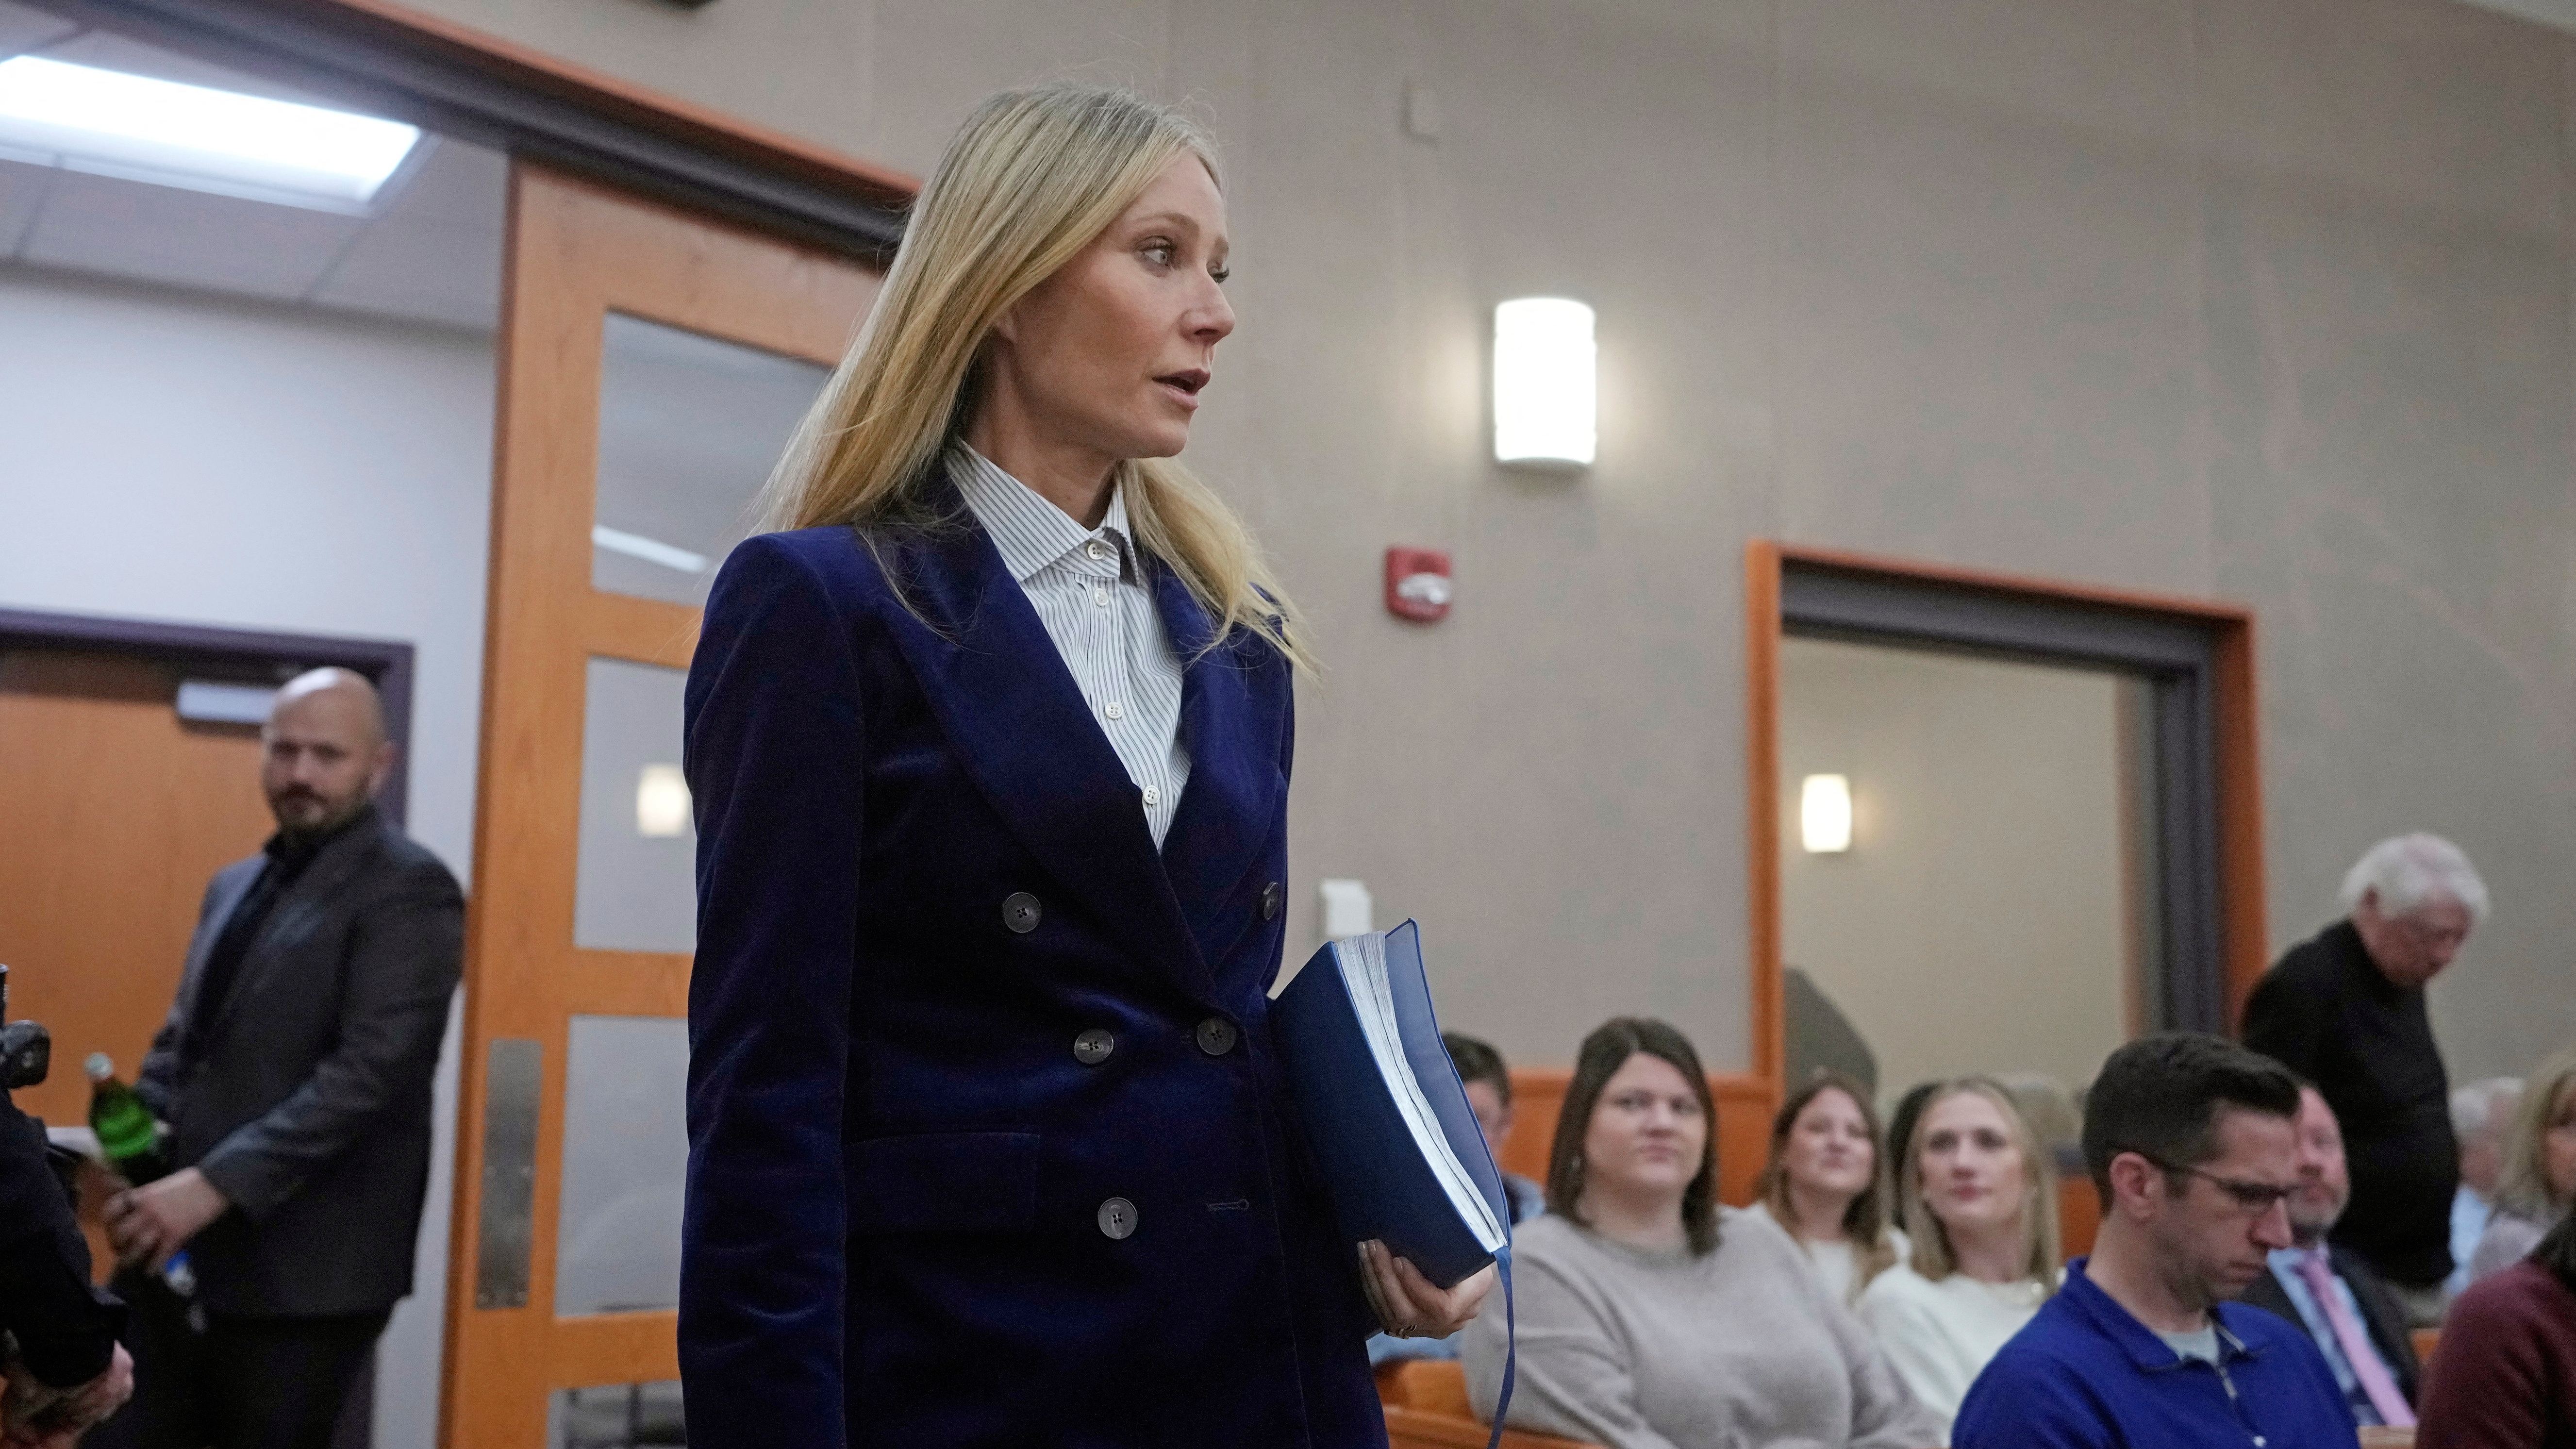 Gwyneth Paltrow enters the courtroom for her trial in Park City